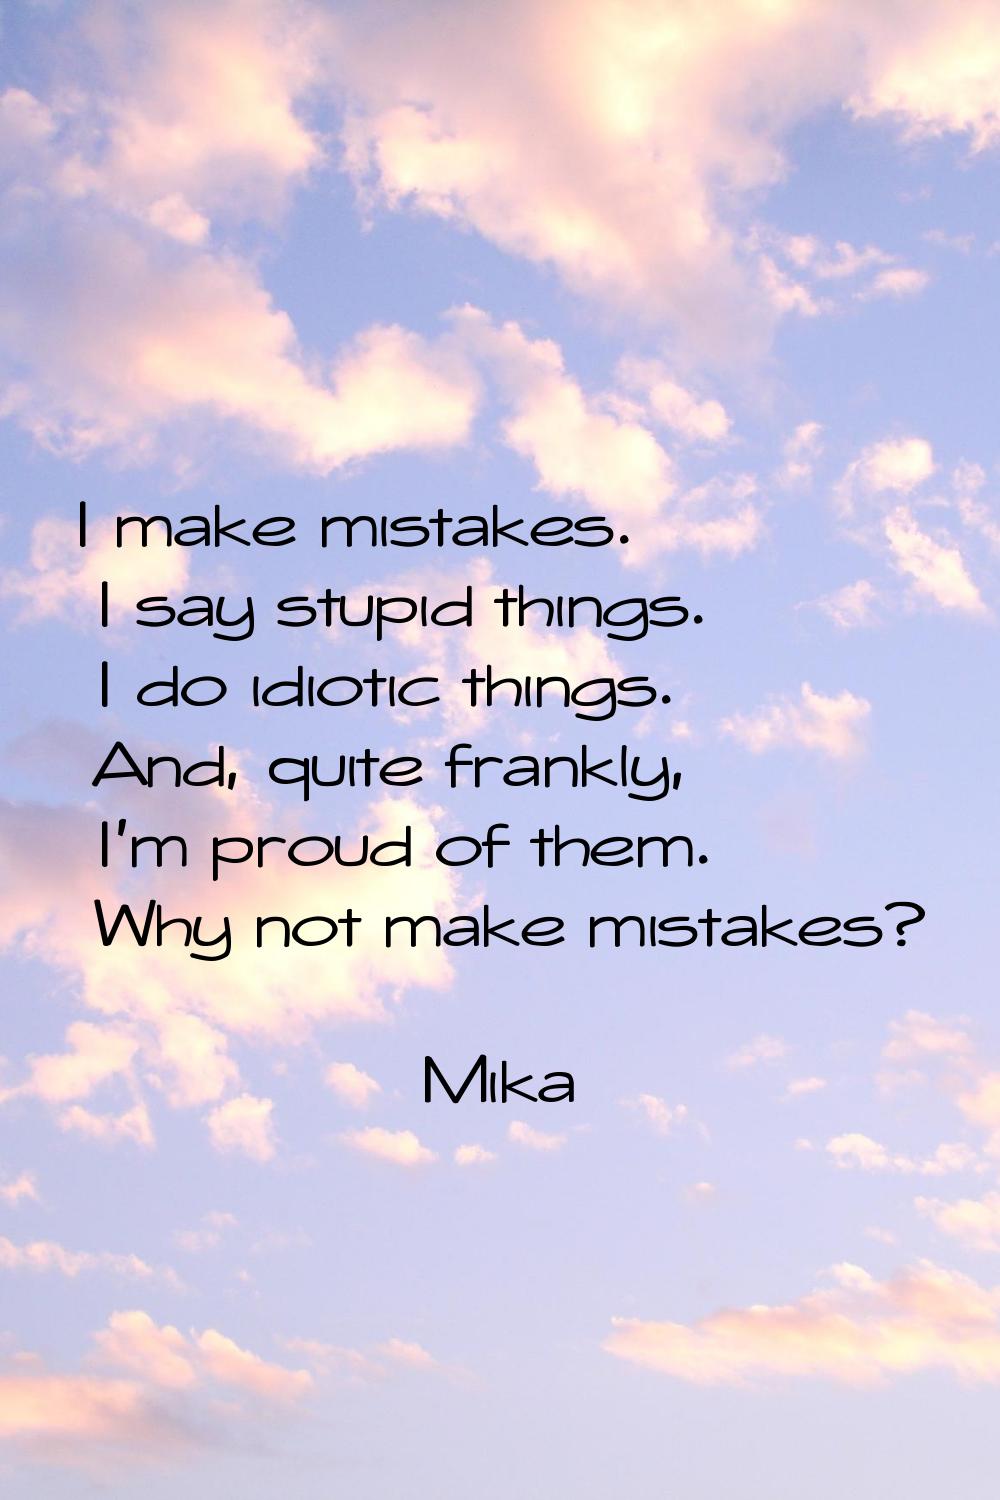 I make mistakes. I say stupid things. I do idiotic things. And, quite frankly, I'm proud of them. W